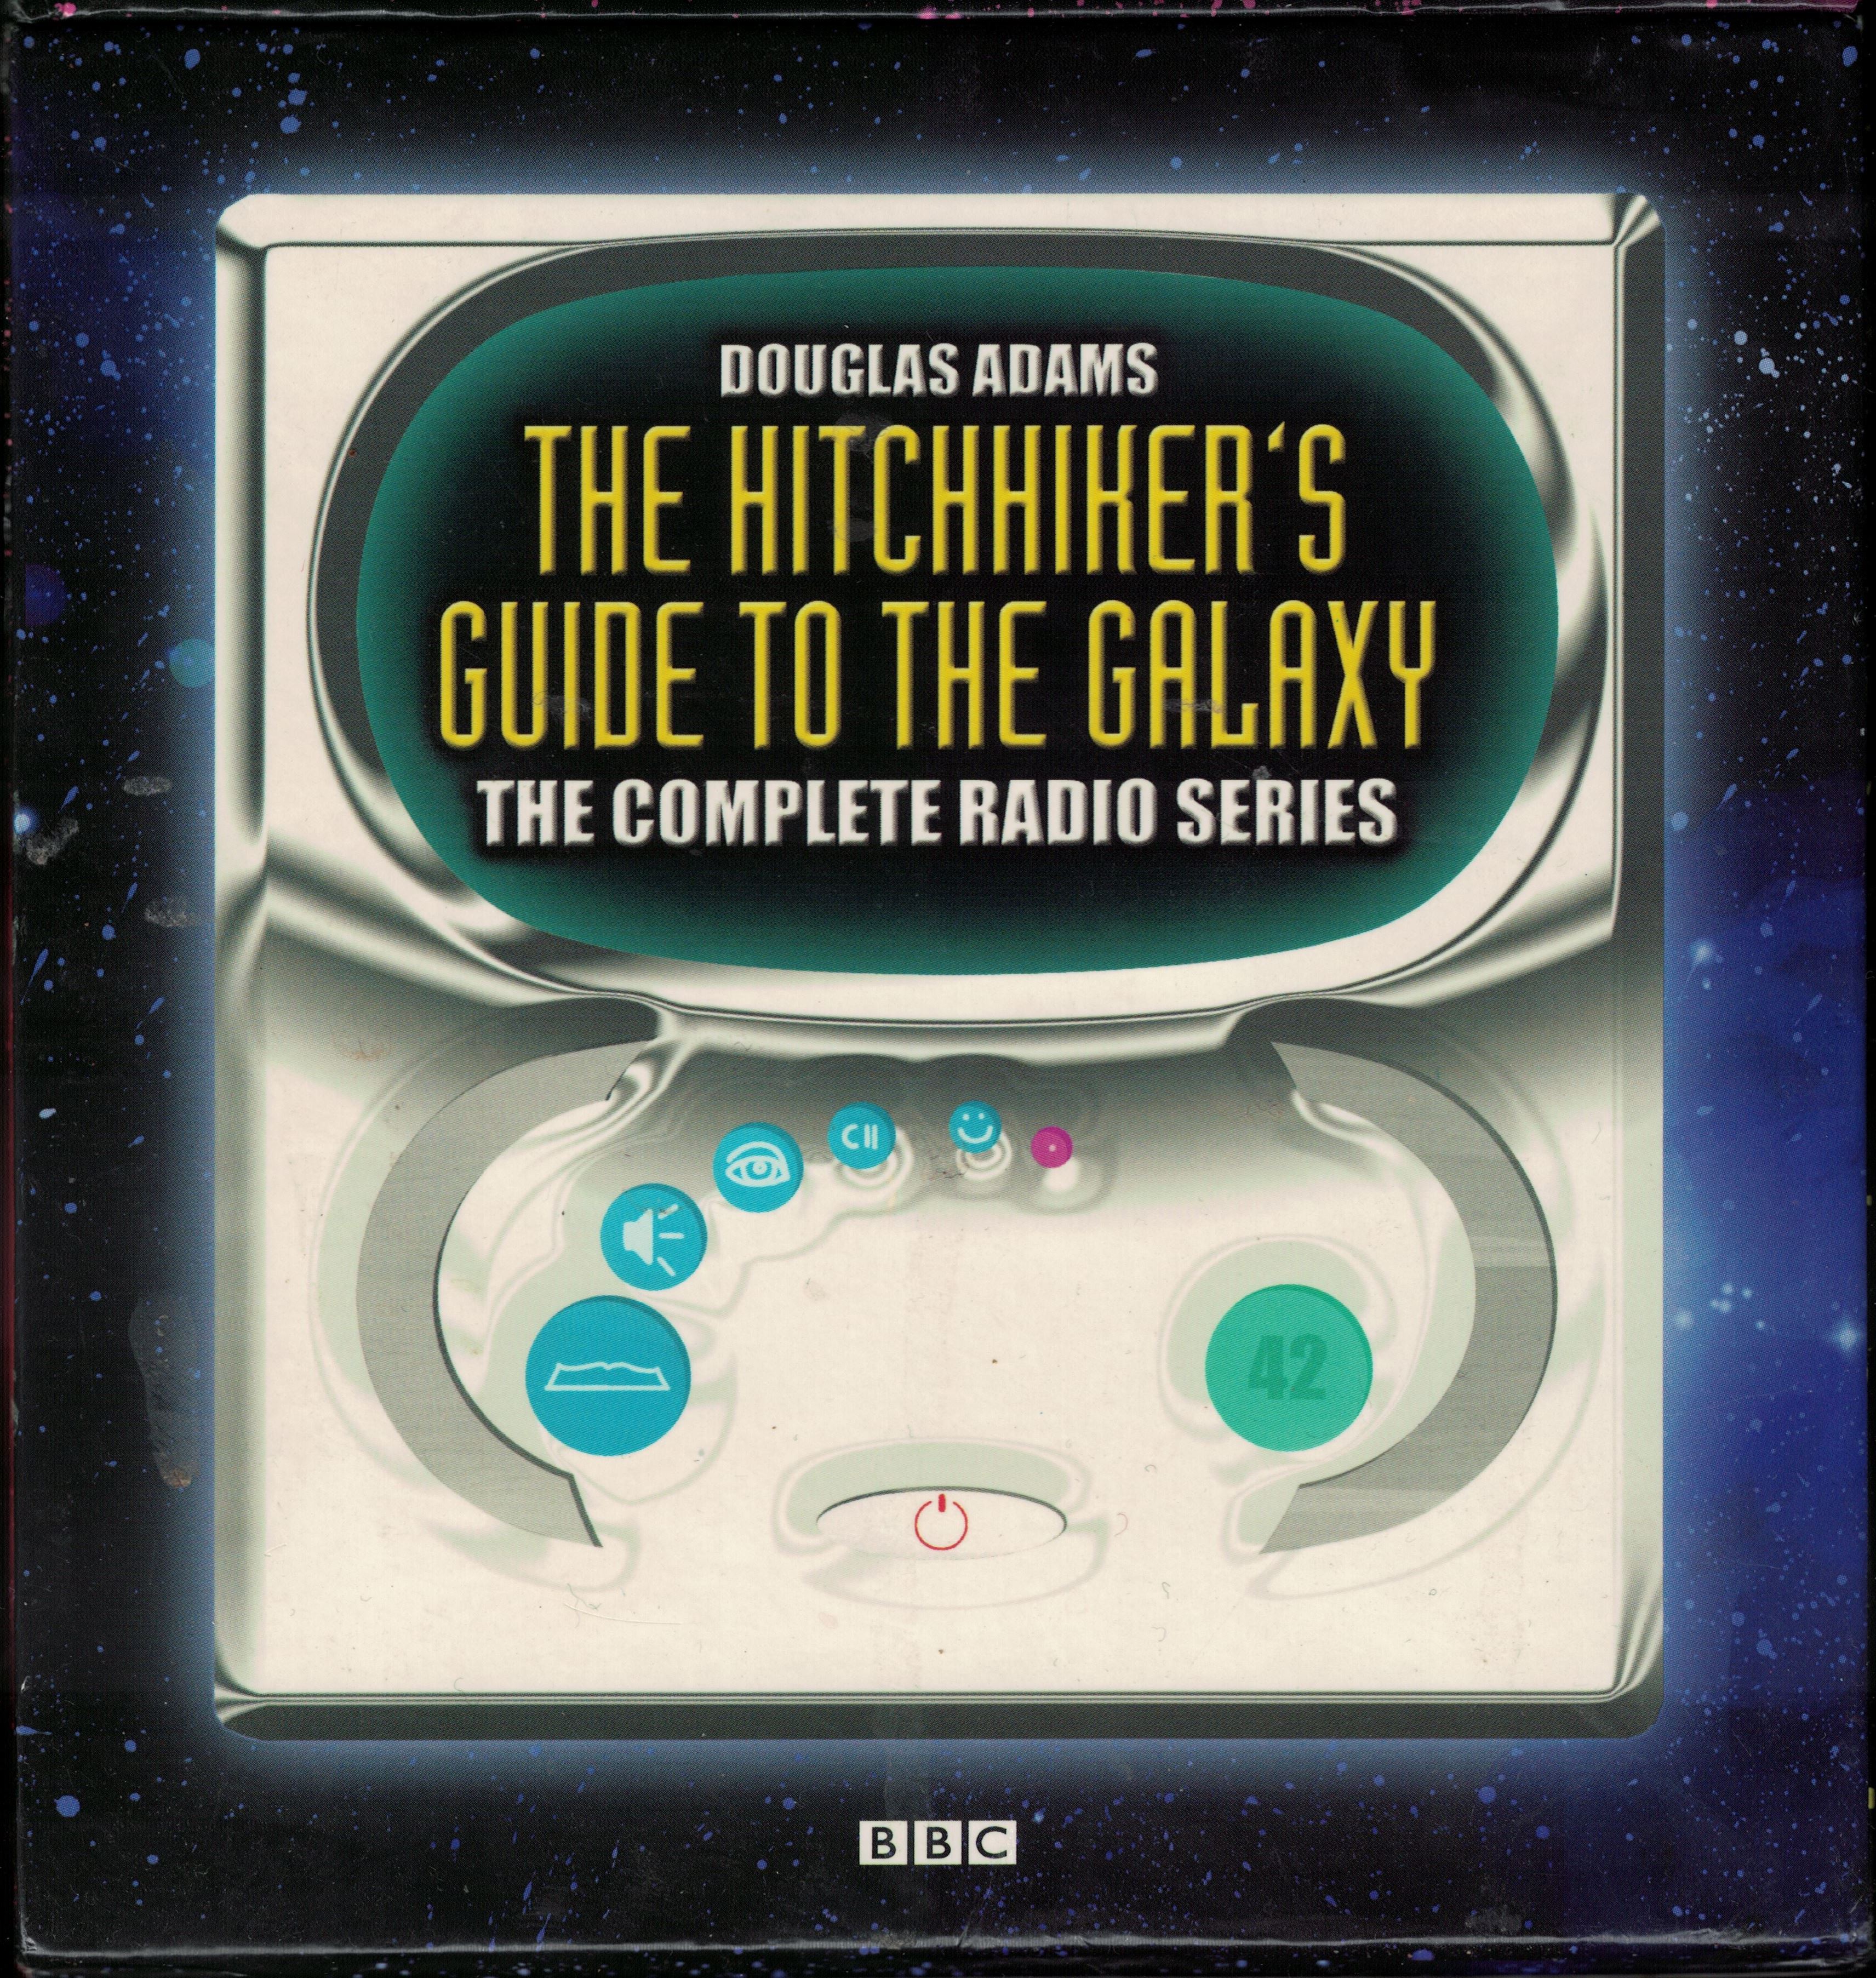 The Hitchhiker's Guide to the Galaxy - Wikidata